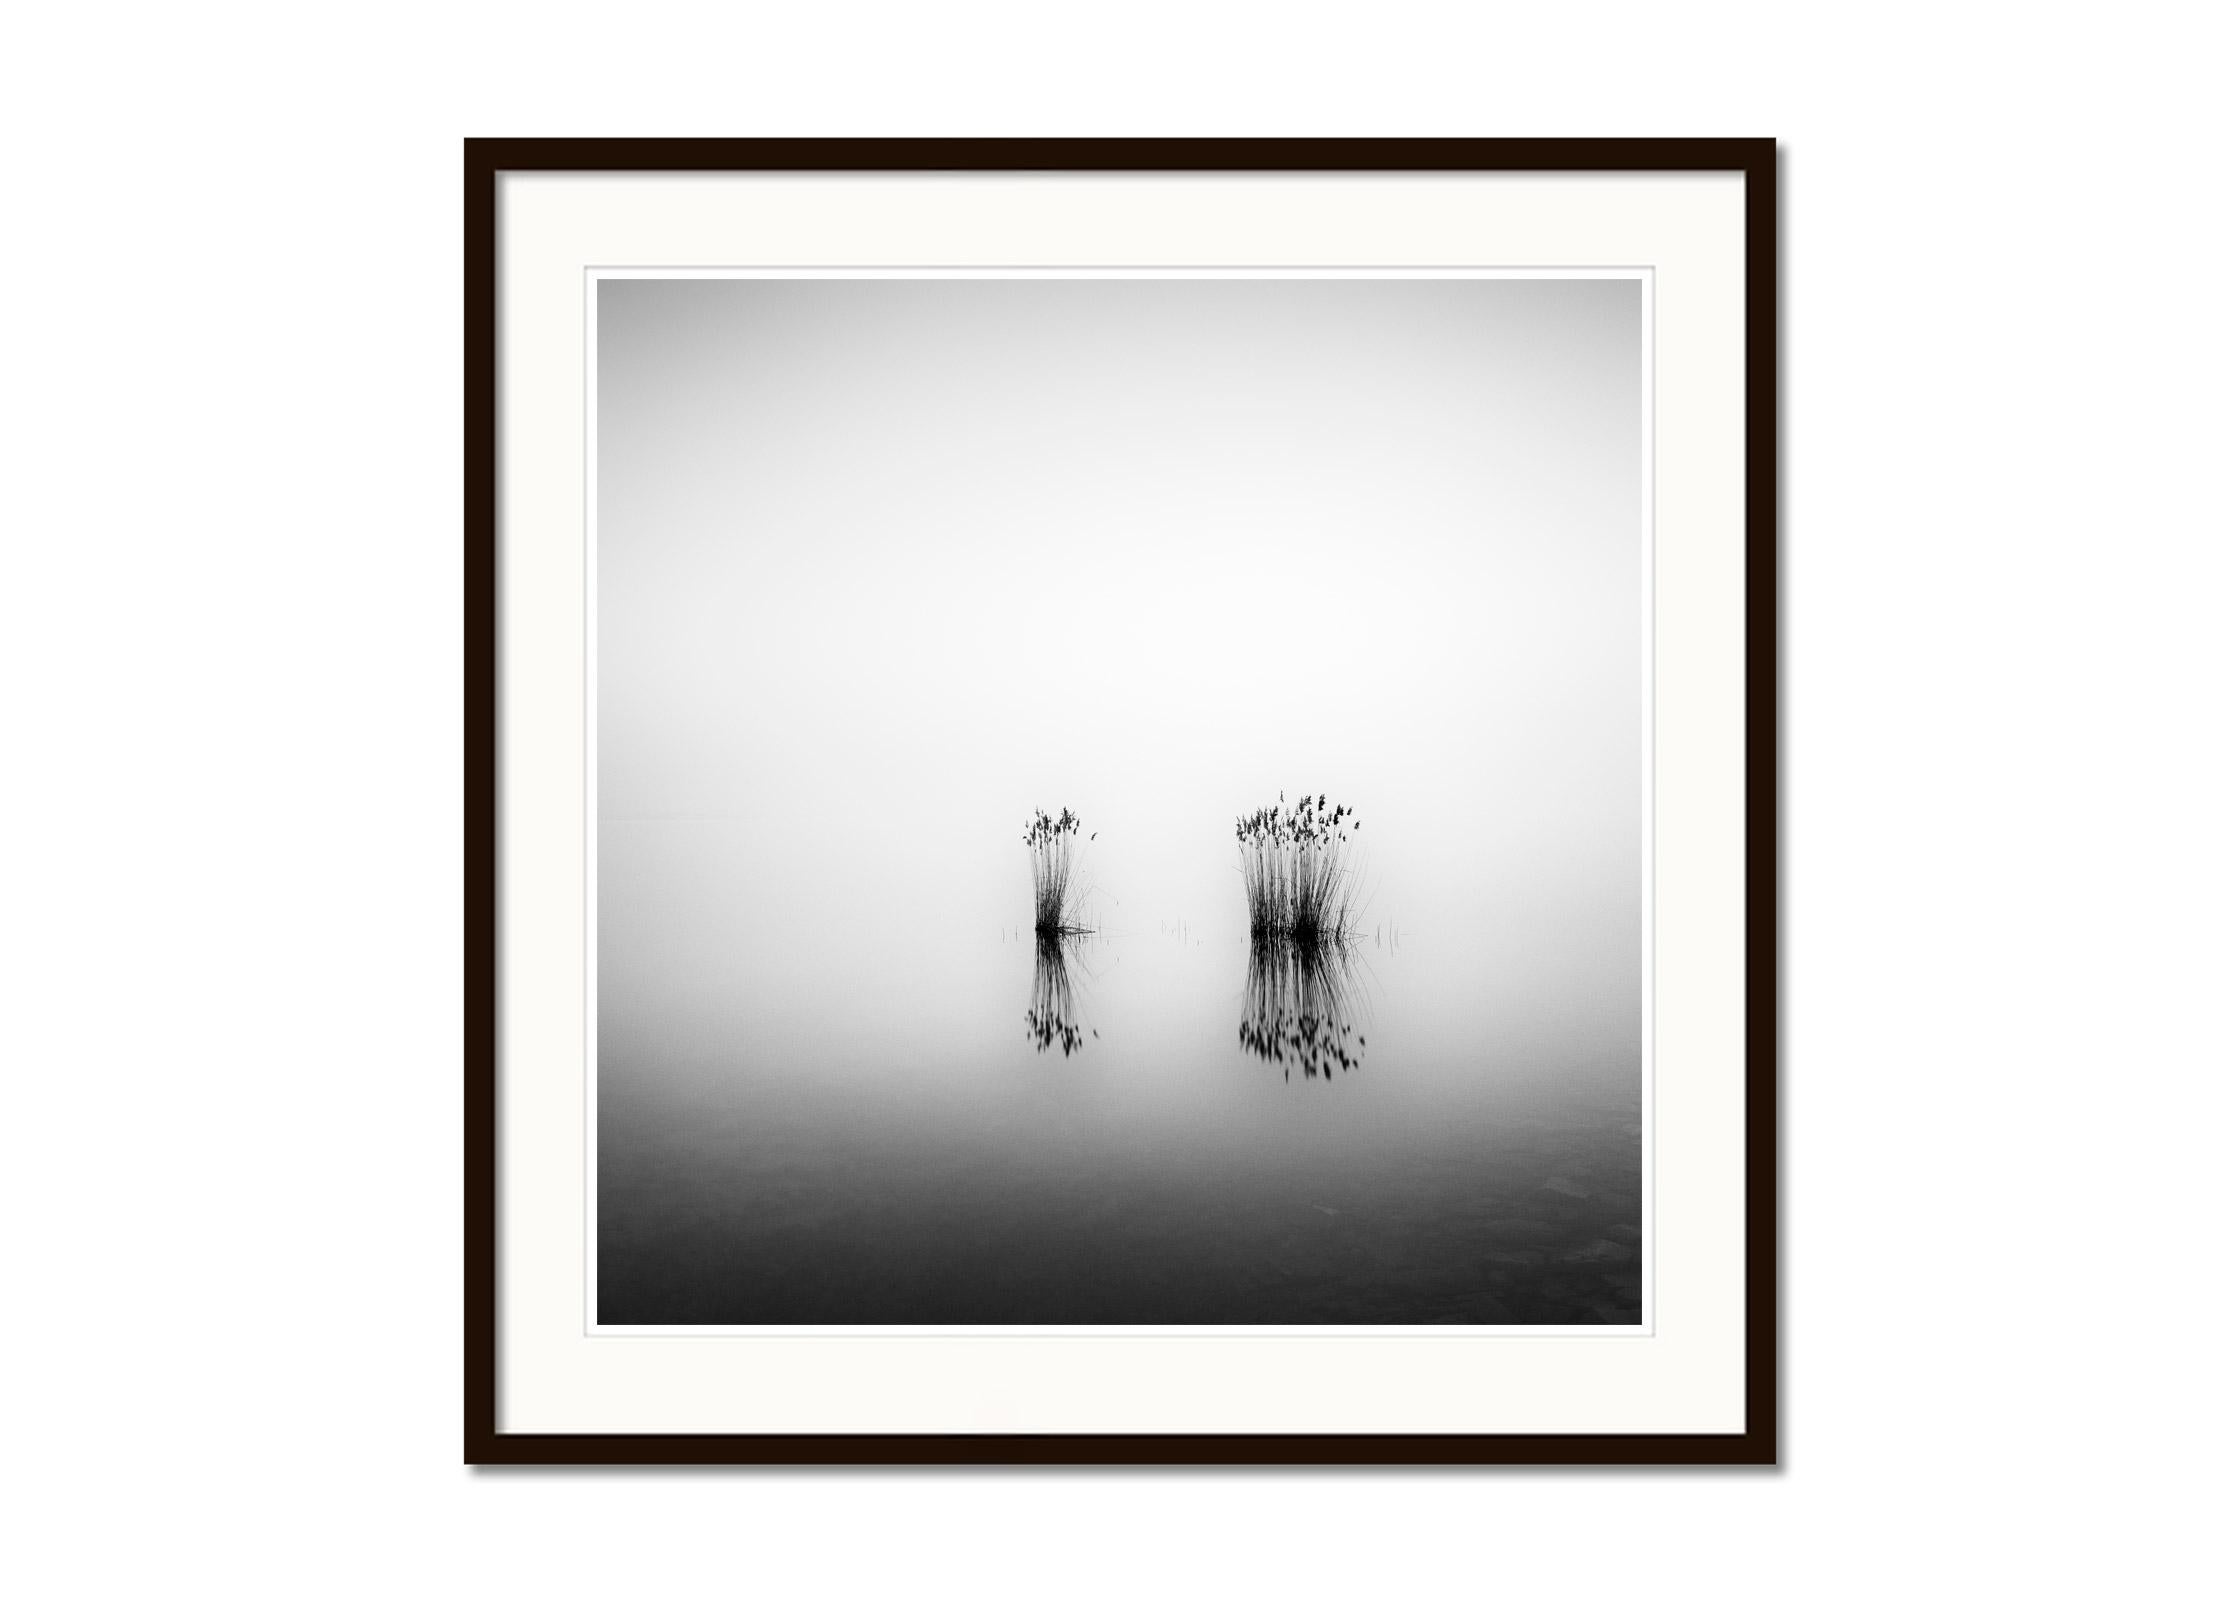 Black and white fine art long exposure waterscape - landscape photography. Phragmites in the fog at Lake Balaton, Hungary. Archival pigment ink print, edition of 9. Signed, titled, dated and numbered by artist. Certificate of authenticity included.